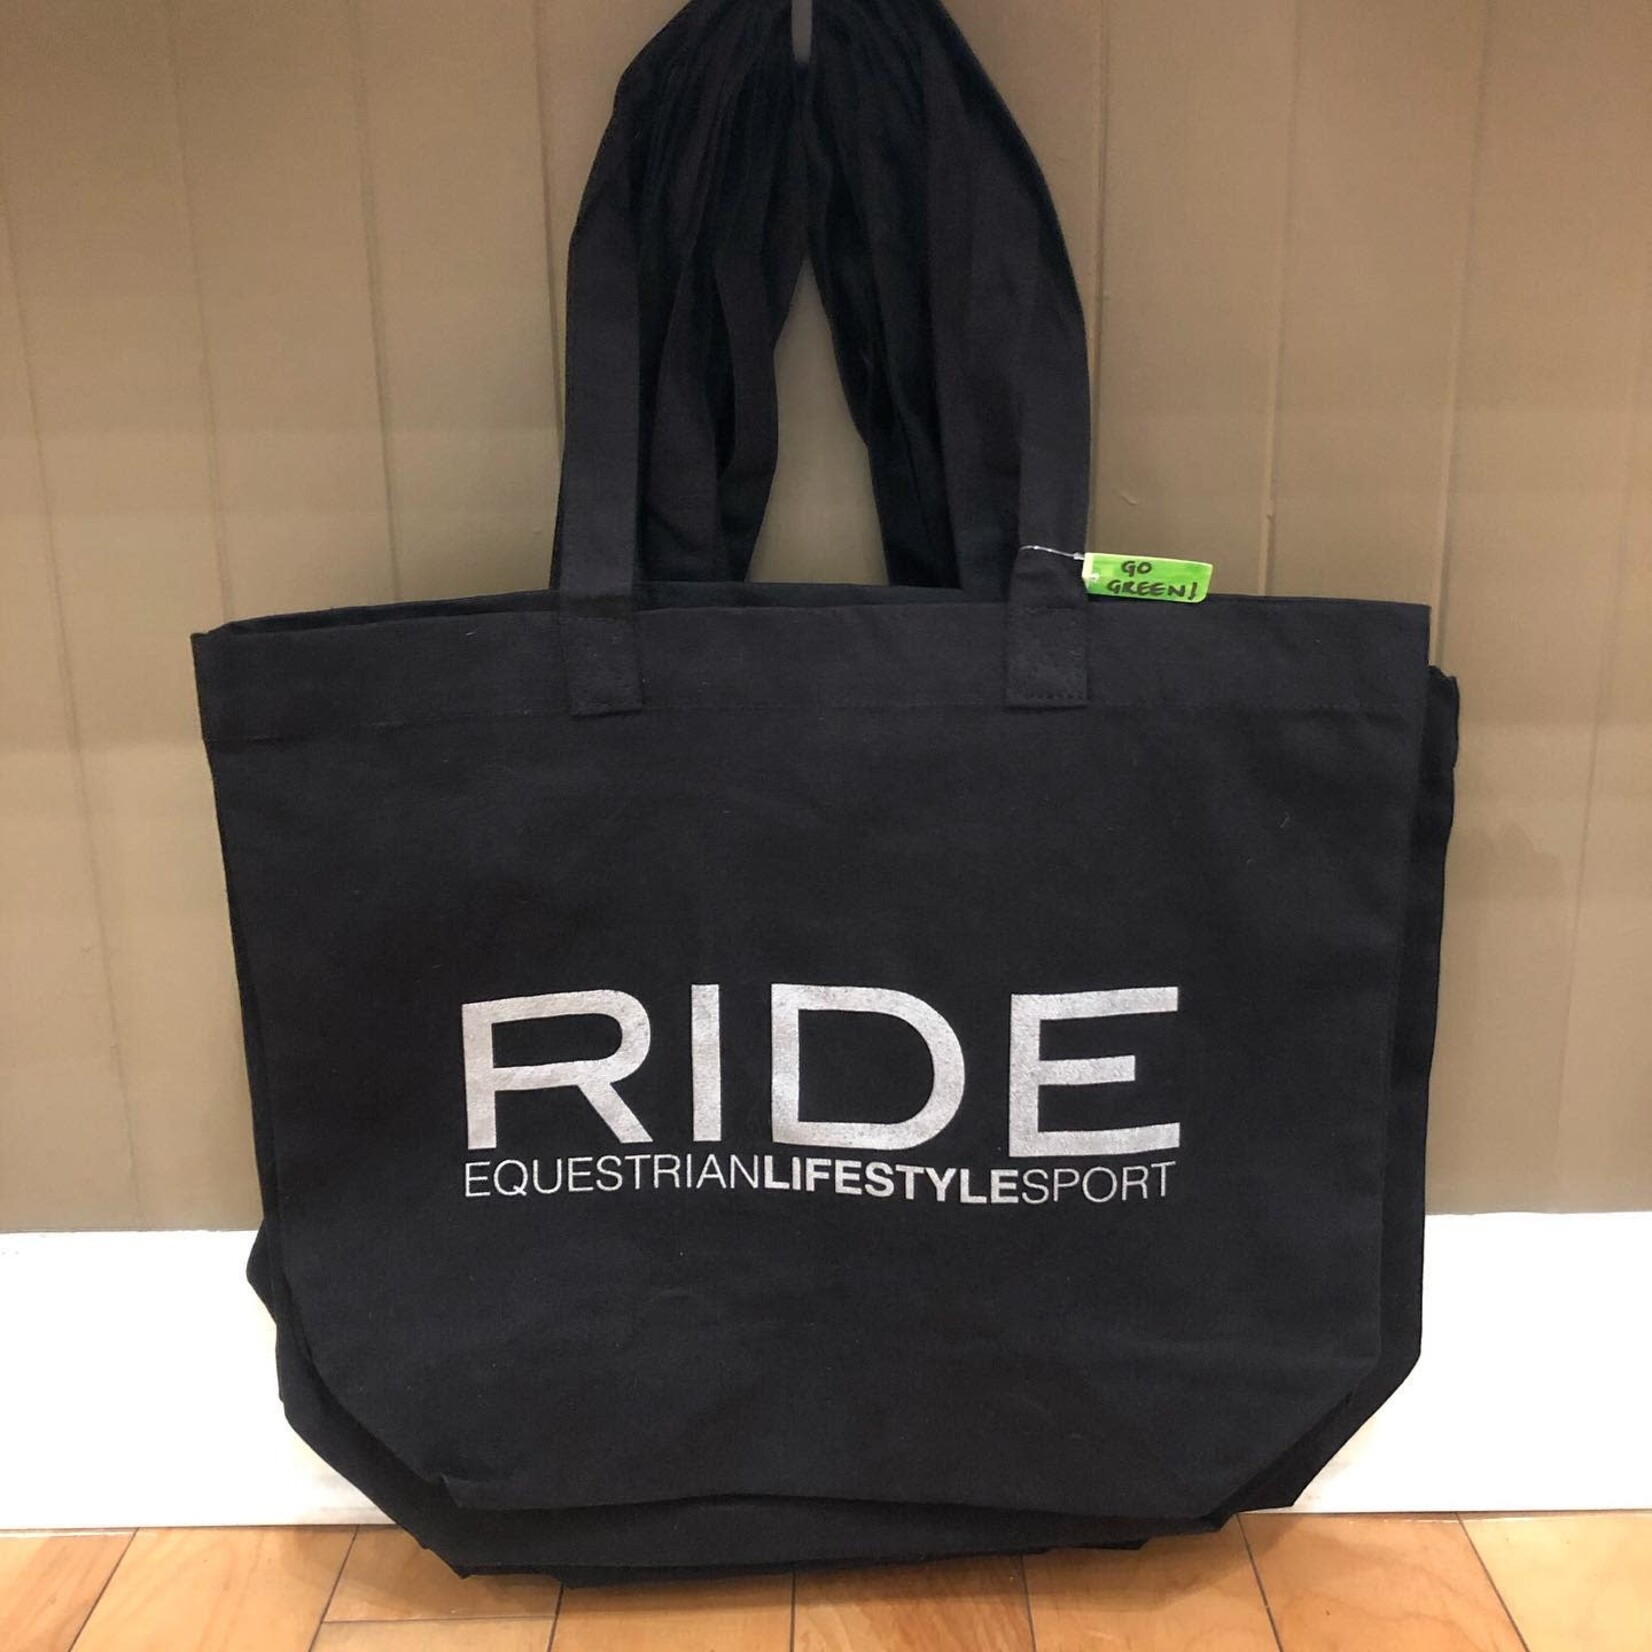 RIDE Printed Reusable Shopping Tote, Black with Metallic Silver Print